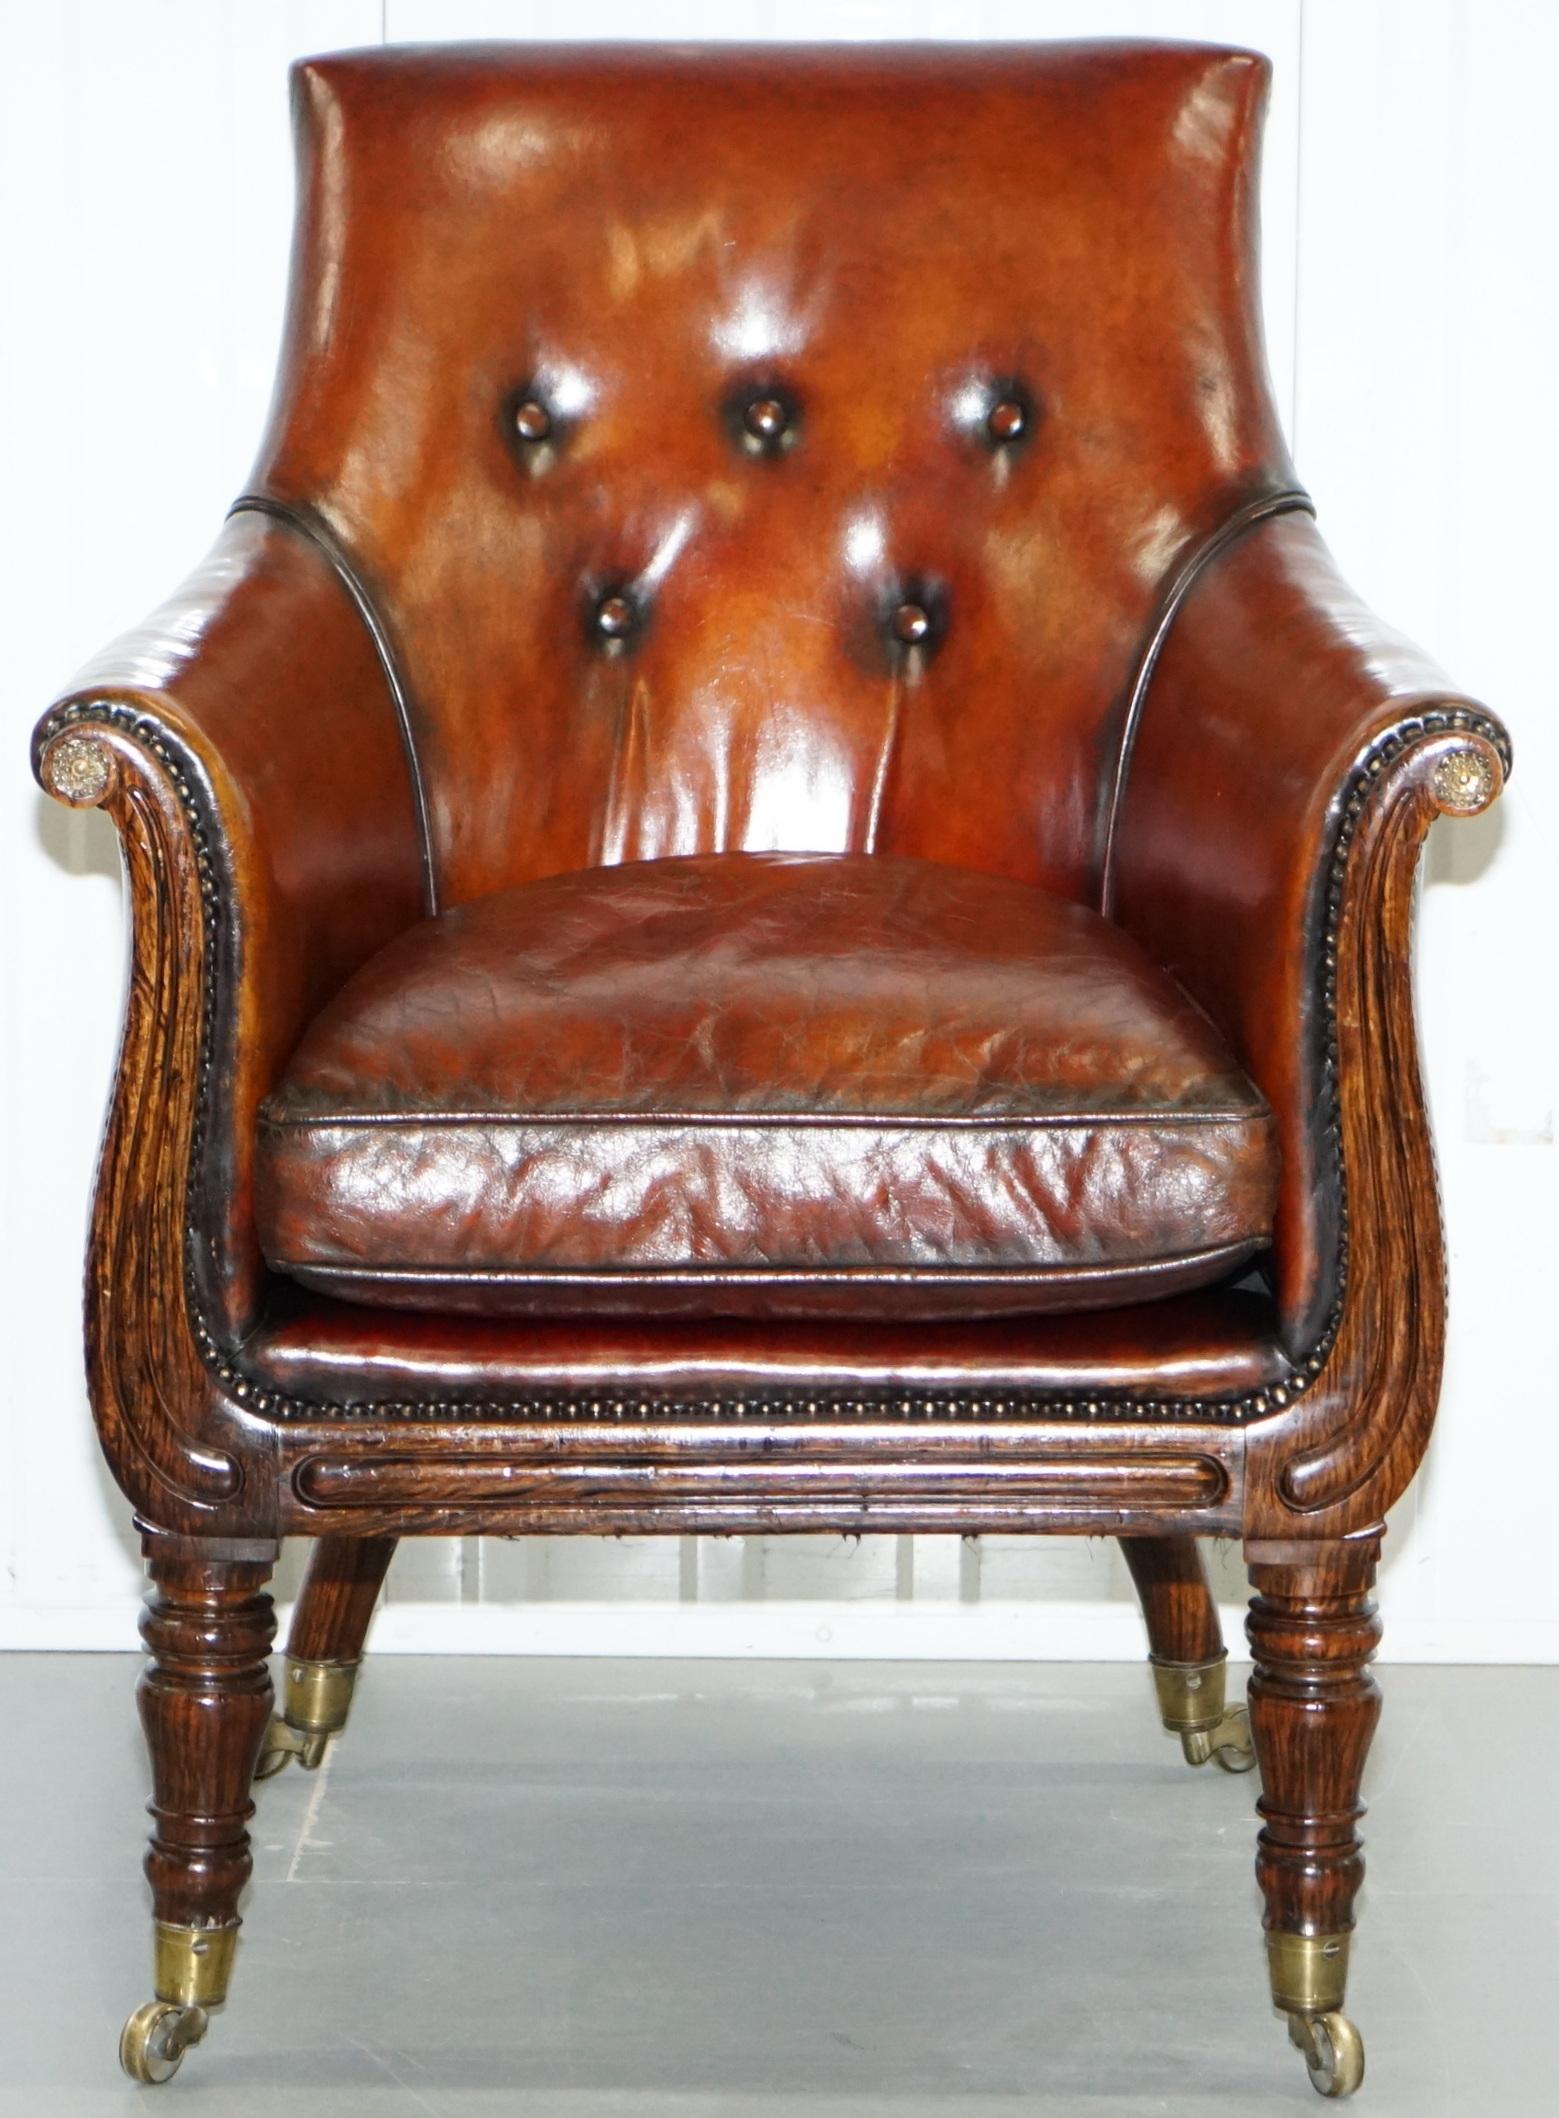 We are delighted to offer for sale this absolutely stunning fully restored hand dyed cigar brown leather period Regency mahogany Chesterfield Porters armchair attributed to Gillows 

A very good looking and classically designed Regency piece, if